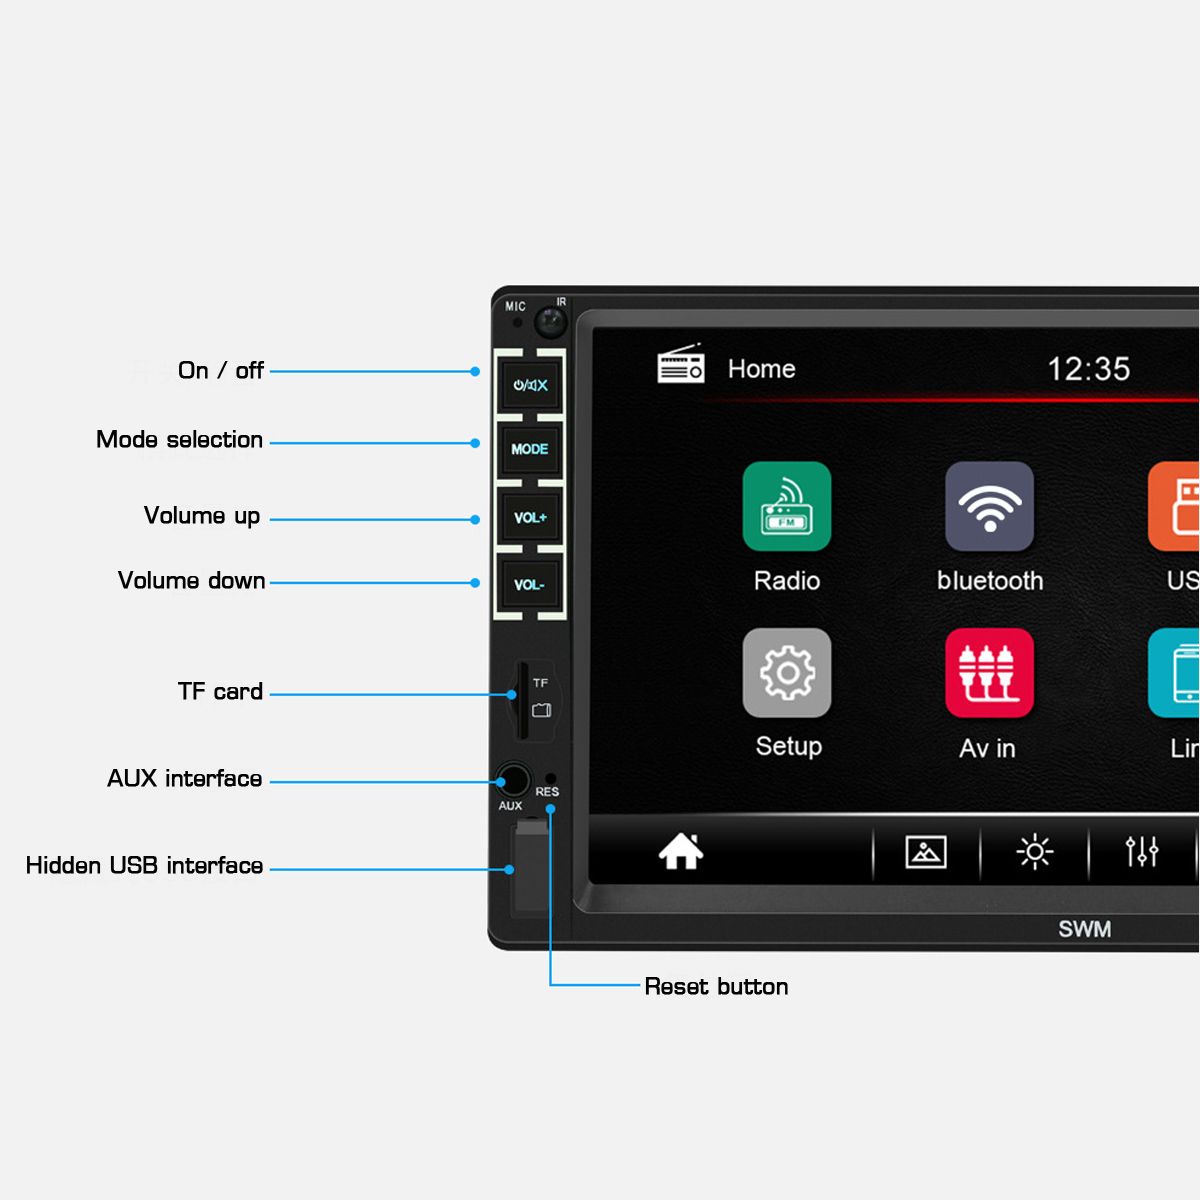 SWM-N7-Car-MP5-Multimedia-Player-Radio-LCD-Capacitive-Touch-Screen-FM-AUX-USB-TF-Card-Remote-Control-1657312